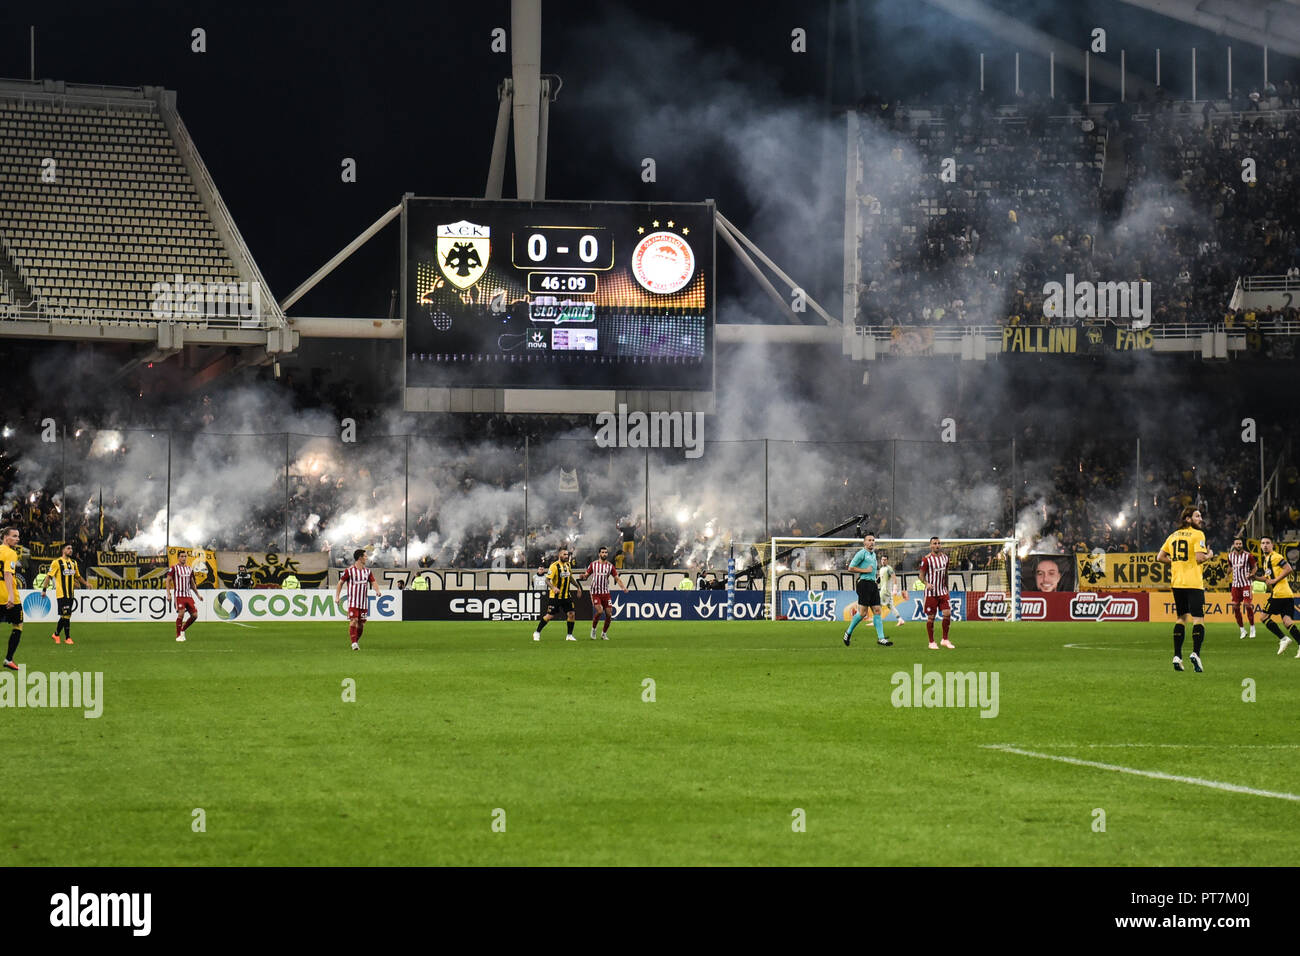 Athens, Greece, Greece. 7th Oct, 2018. AEK vs Olympiakos, scores seen on  the board during the